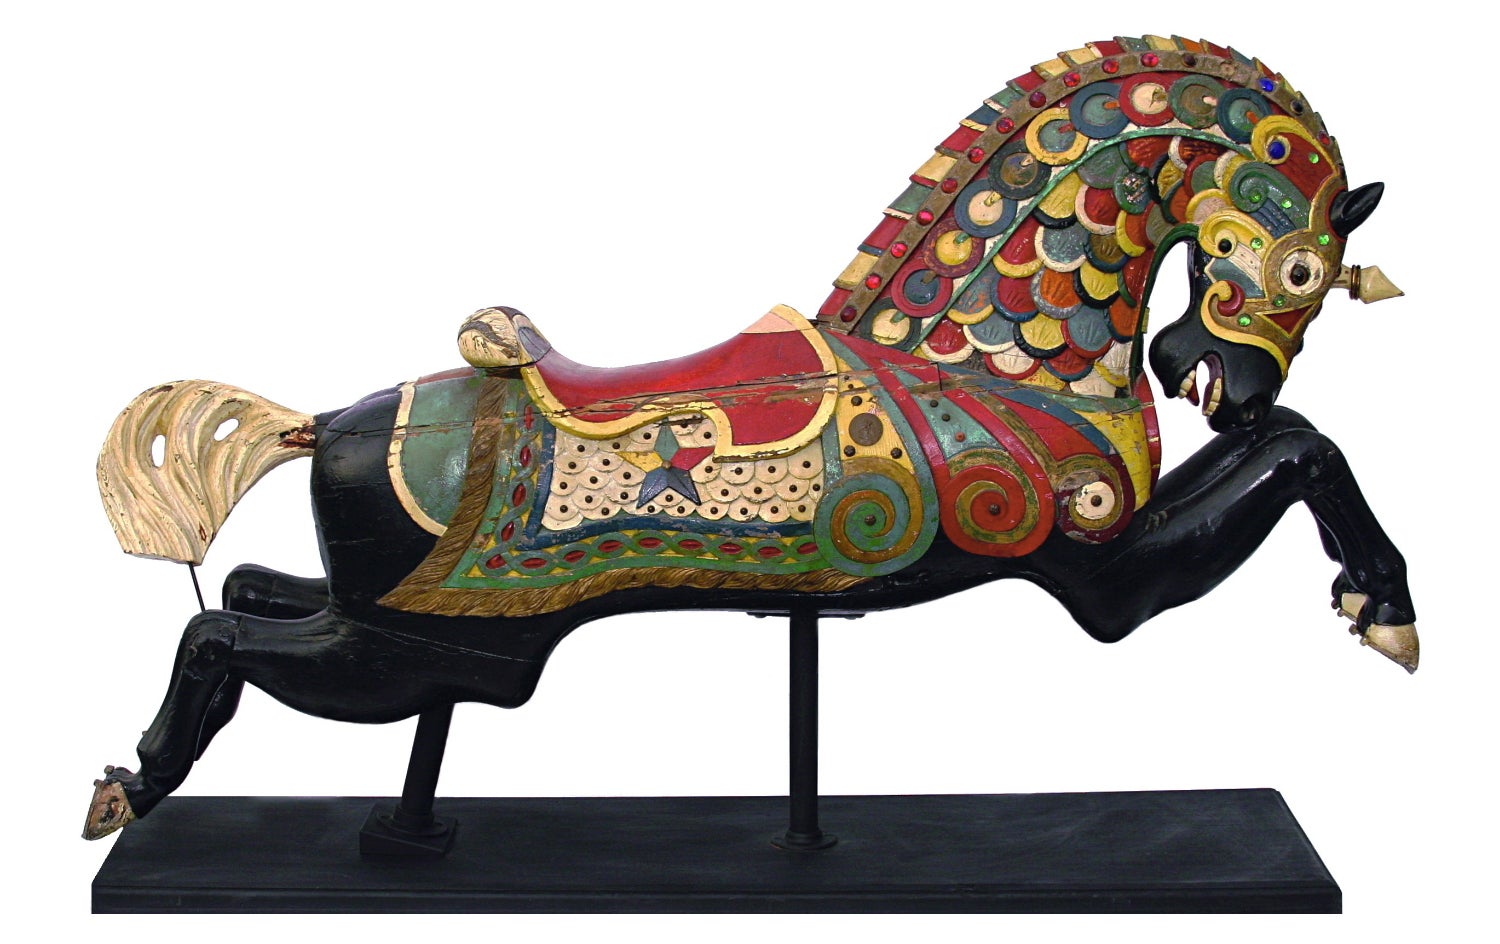 Armored Carousel Horse made by C.W. Parker in Leavenworth, Kansas circa 1915